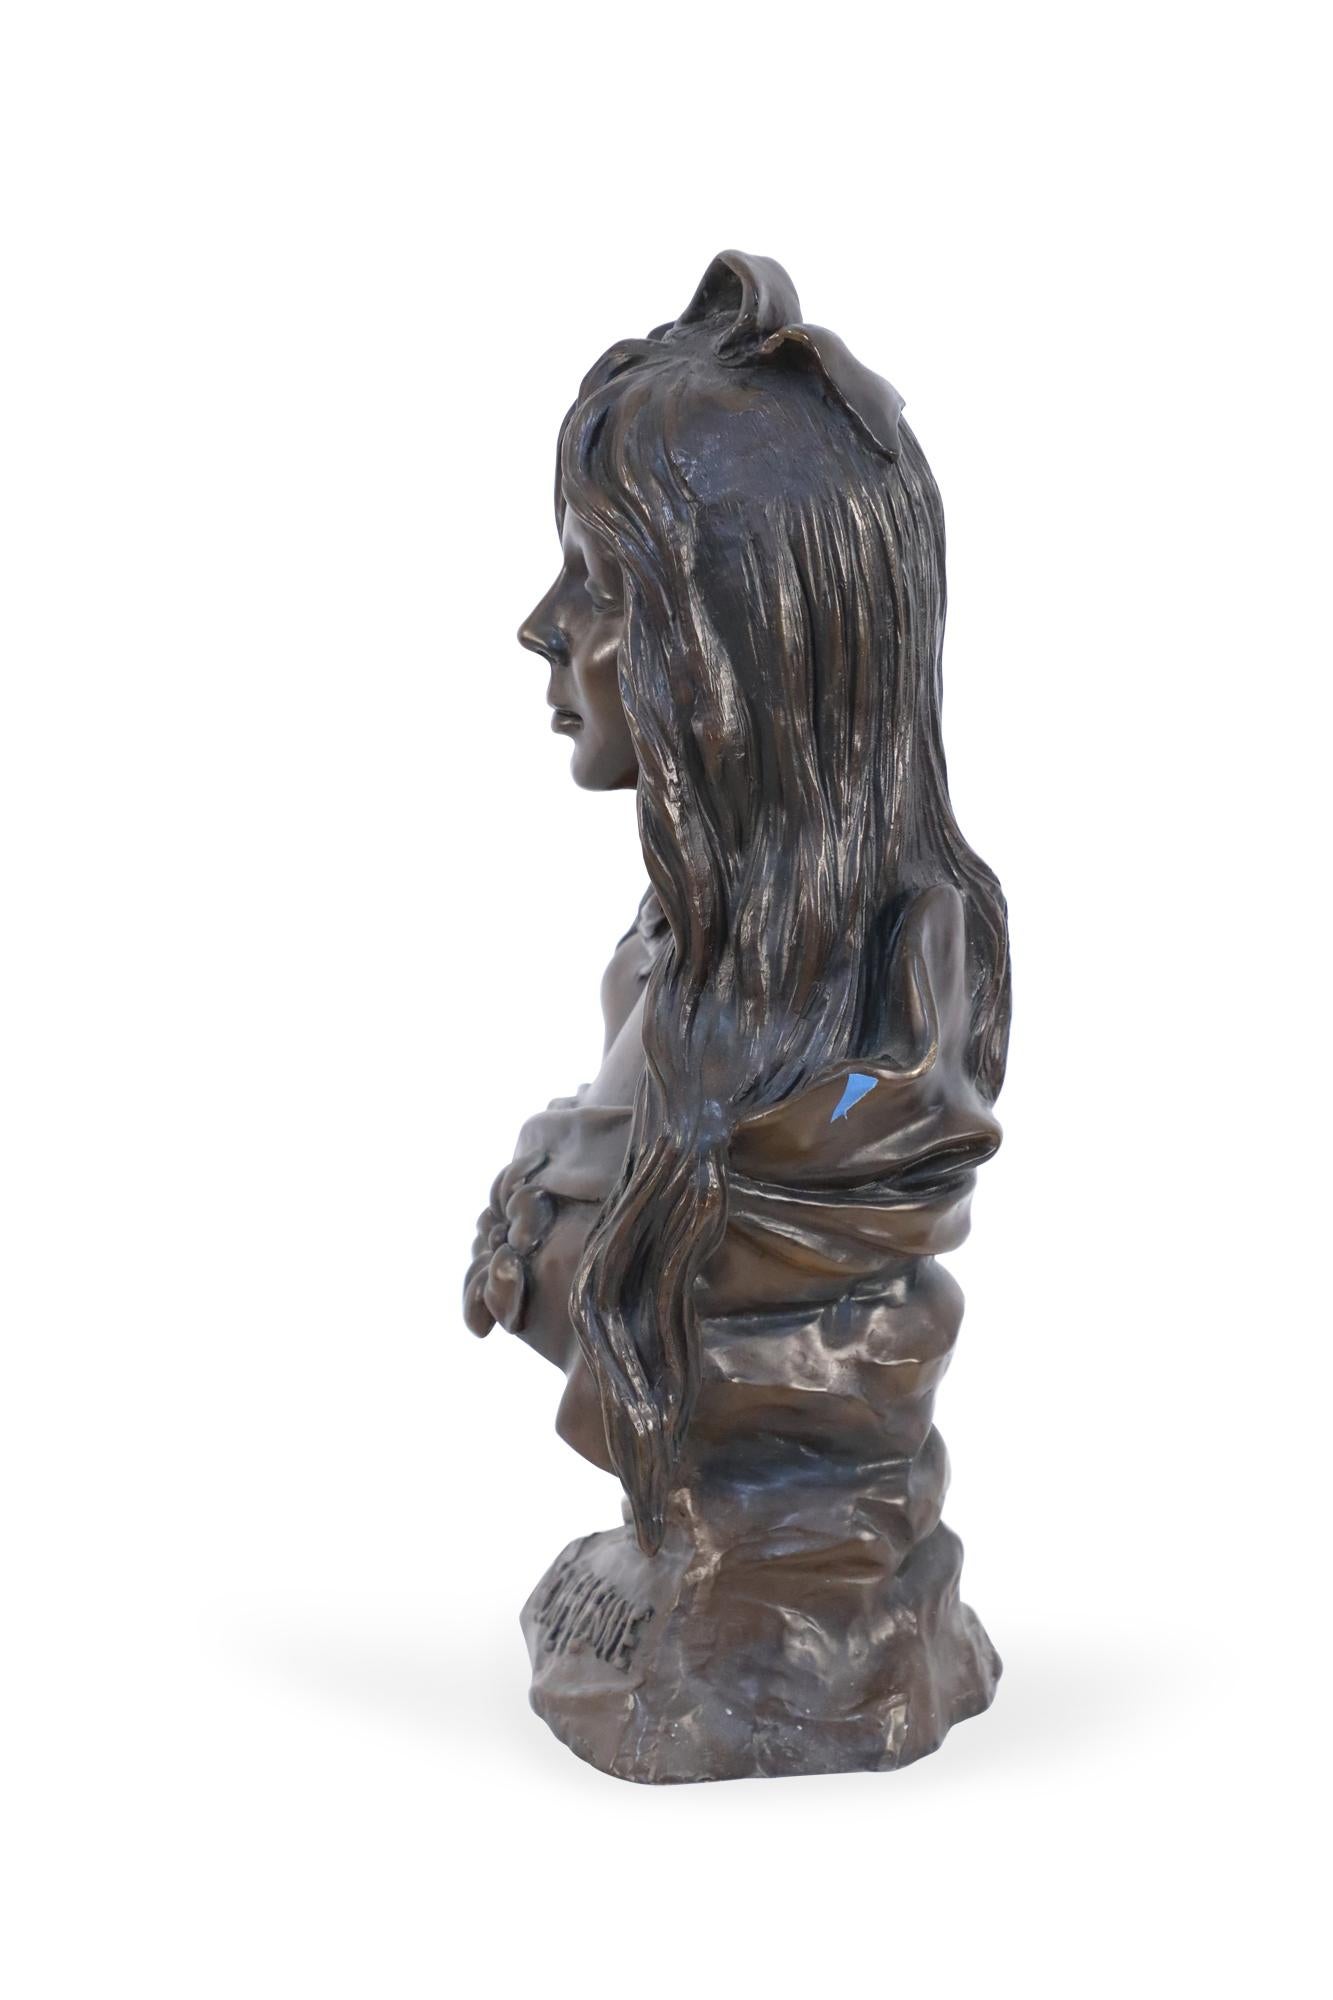 French Art Nouveau-style bronze bust of woman with long wavy hair and hair bow in a dress with central flower and the word 'Bohemienne' engraved in the base.